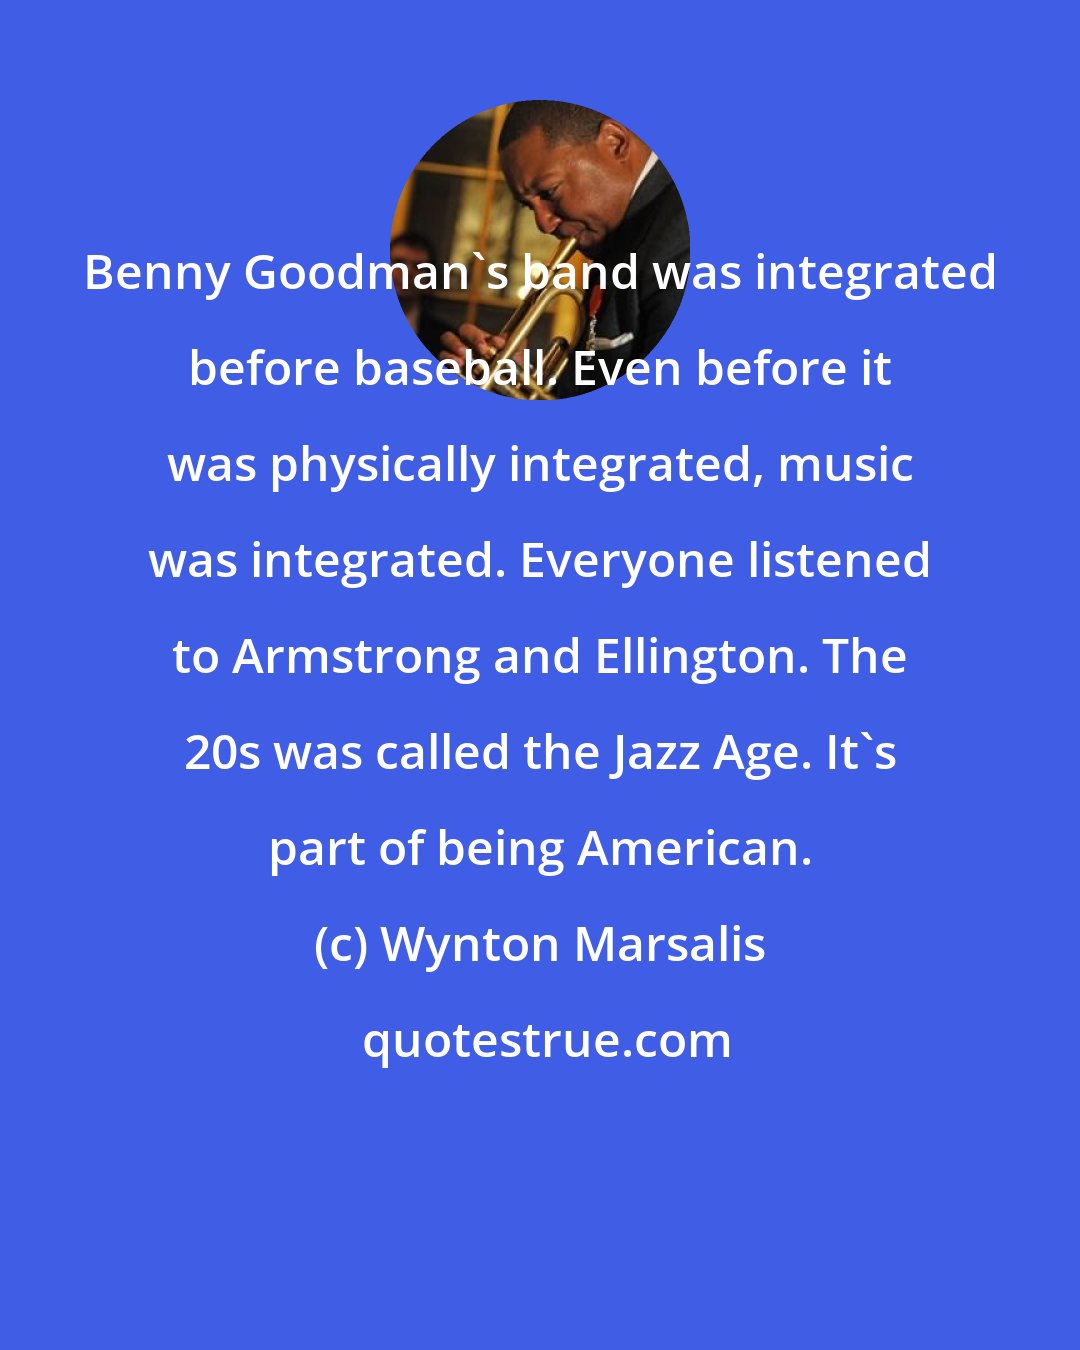 Wynton Marsalis: Benny Goodman's band was integrated before baseball. Even before it was physically integrated, music was integrated. Everyone listened to Armstrong and Ellington. The 20s was called the Jazz Age. It's part of being American.